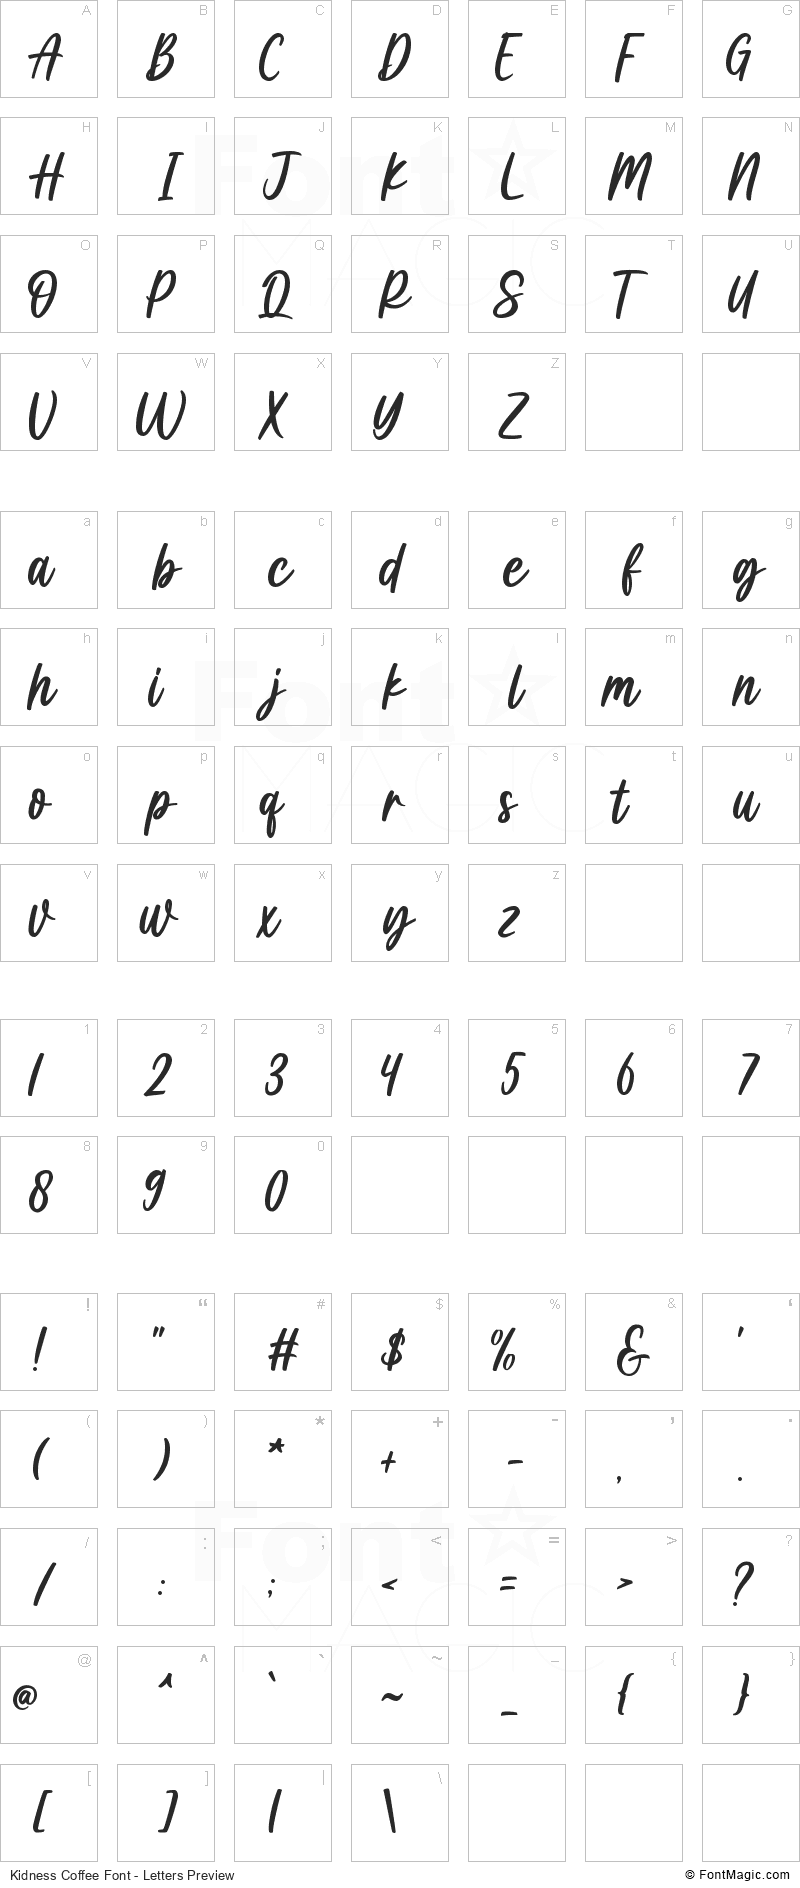 Kidness Coffee Font - All Latters Preview Chart